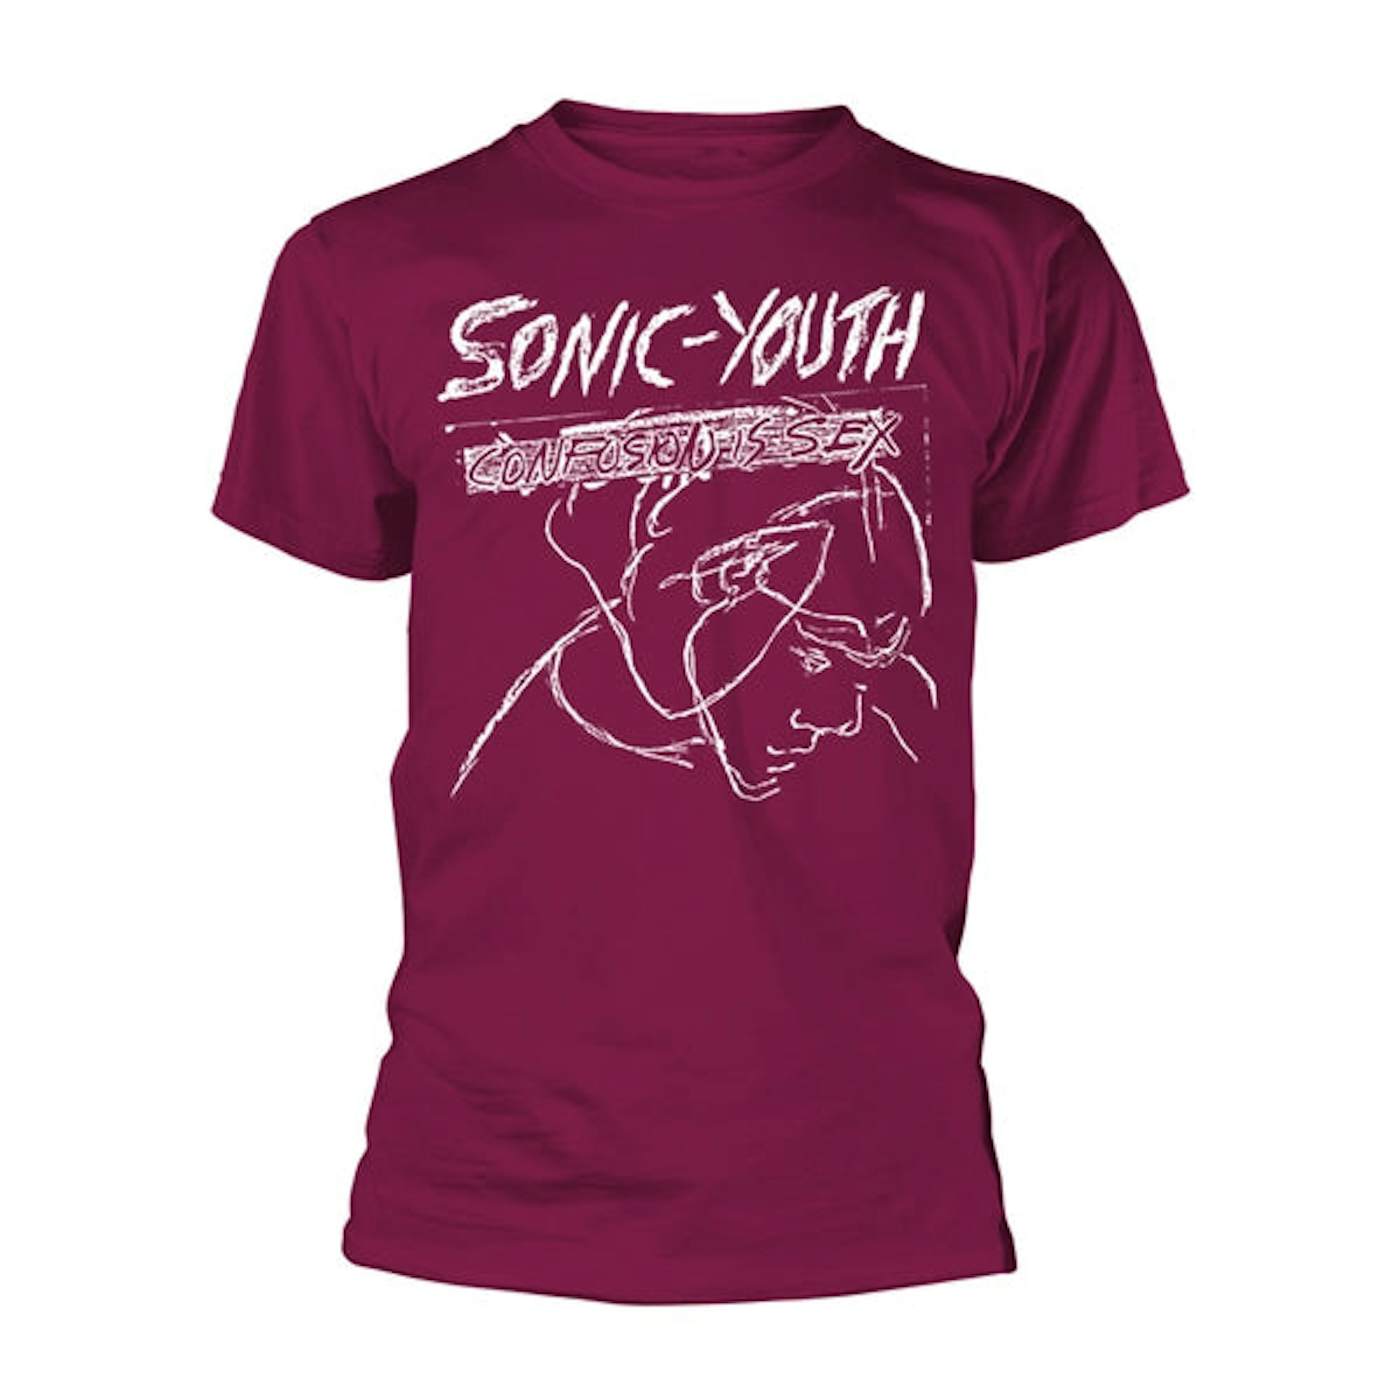 Sonic Youth T-Shirt - Confusion Is Sex